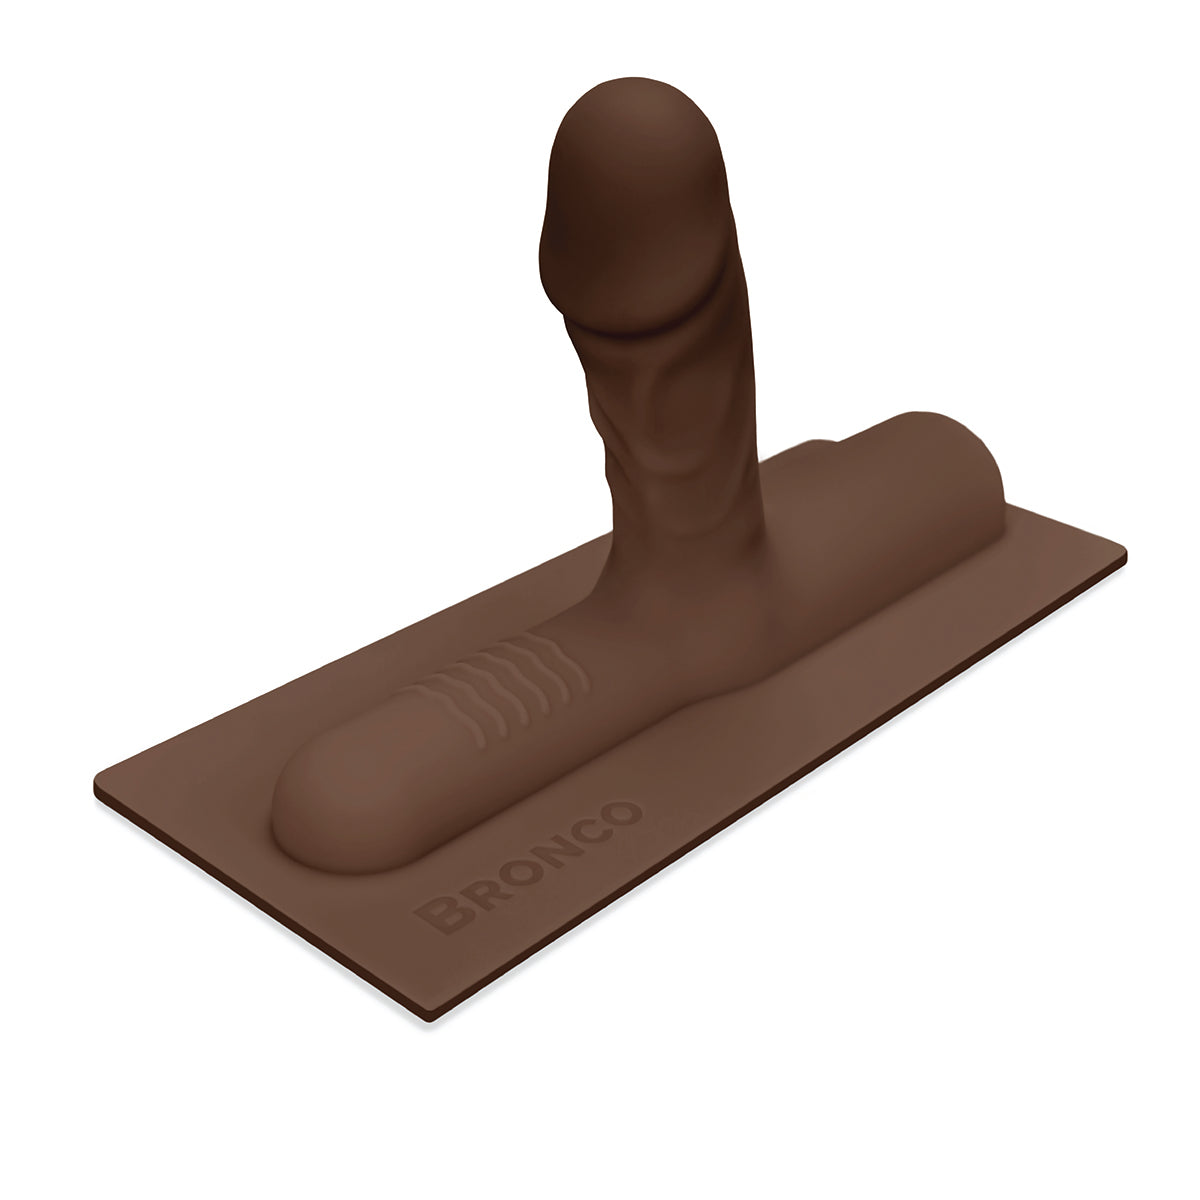 Cowgirl Bronco Attachment - Chocolate Intimates Adult Boutique